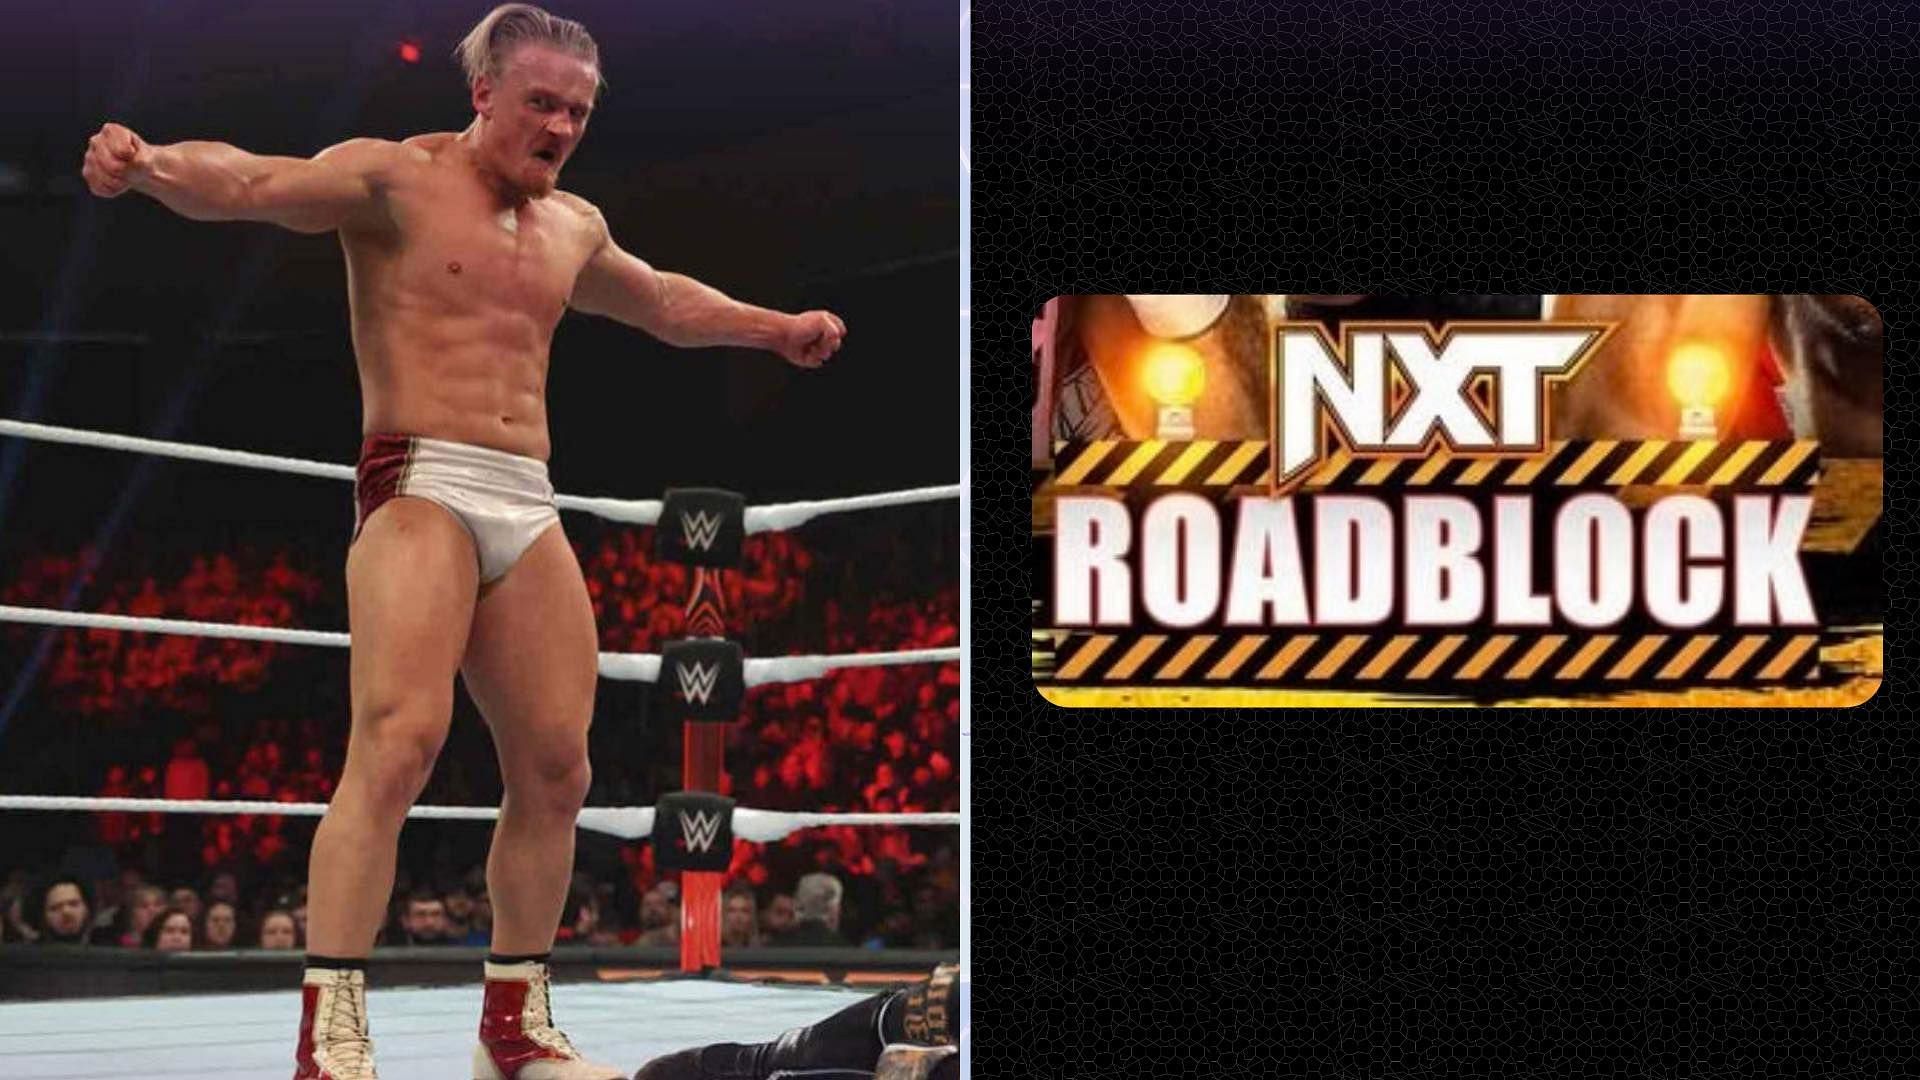 WWE: Shawn Spears makes shocking return to NXT under his AEW gimmick